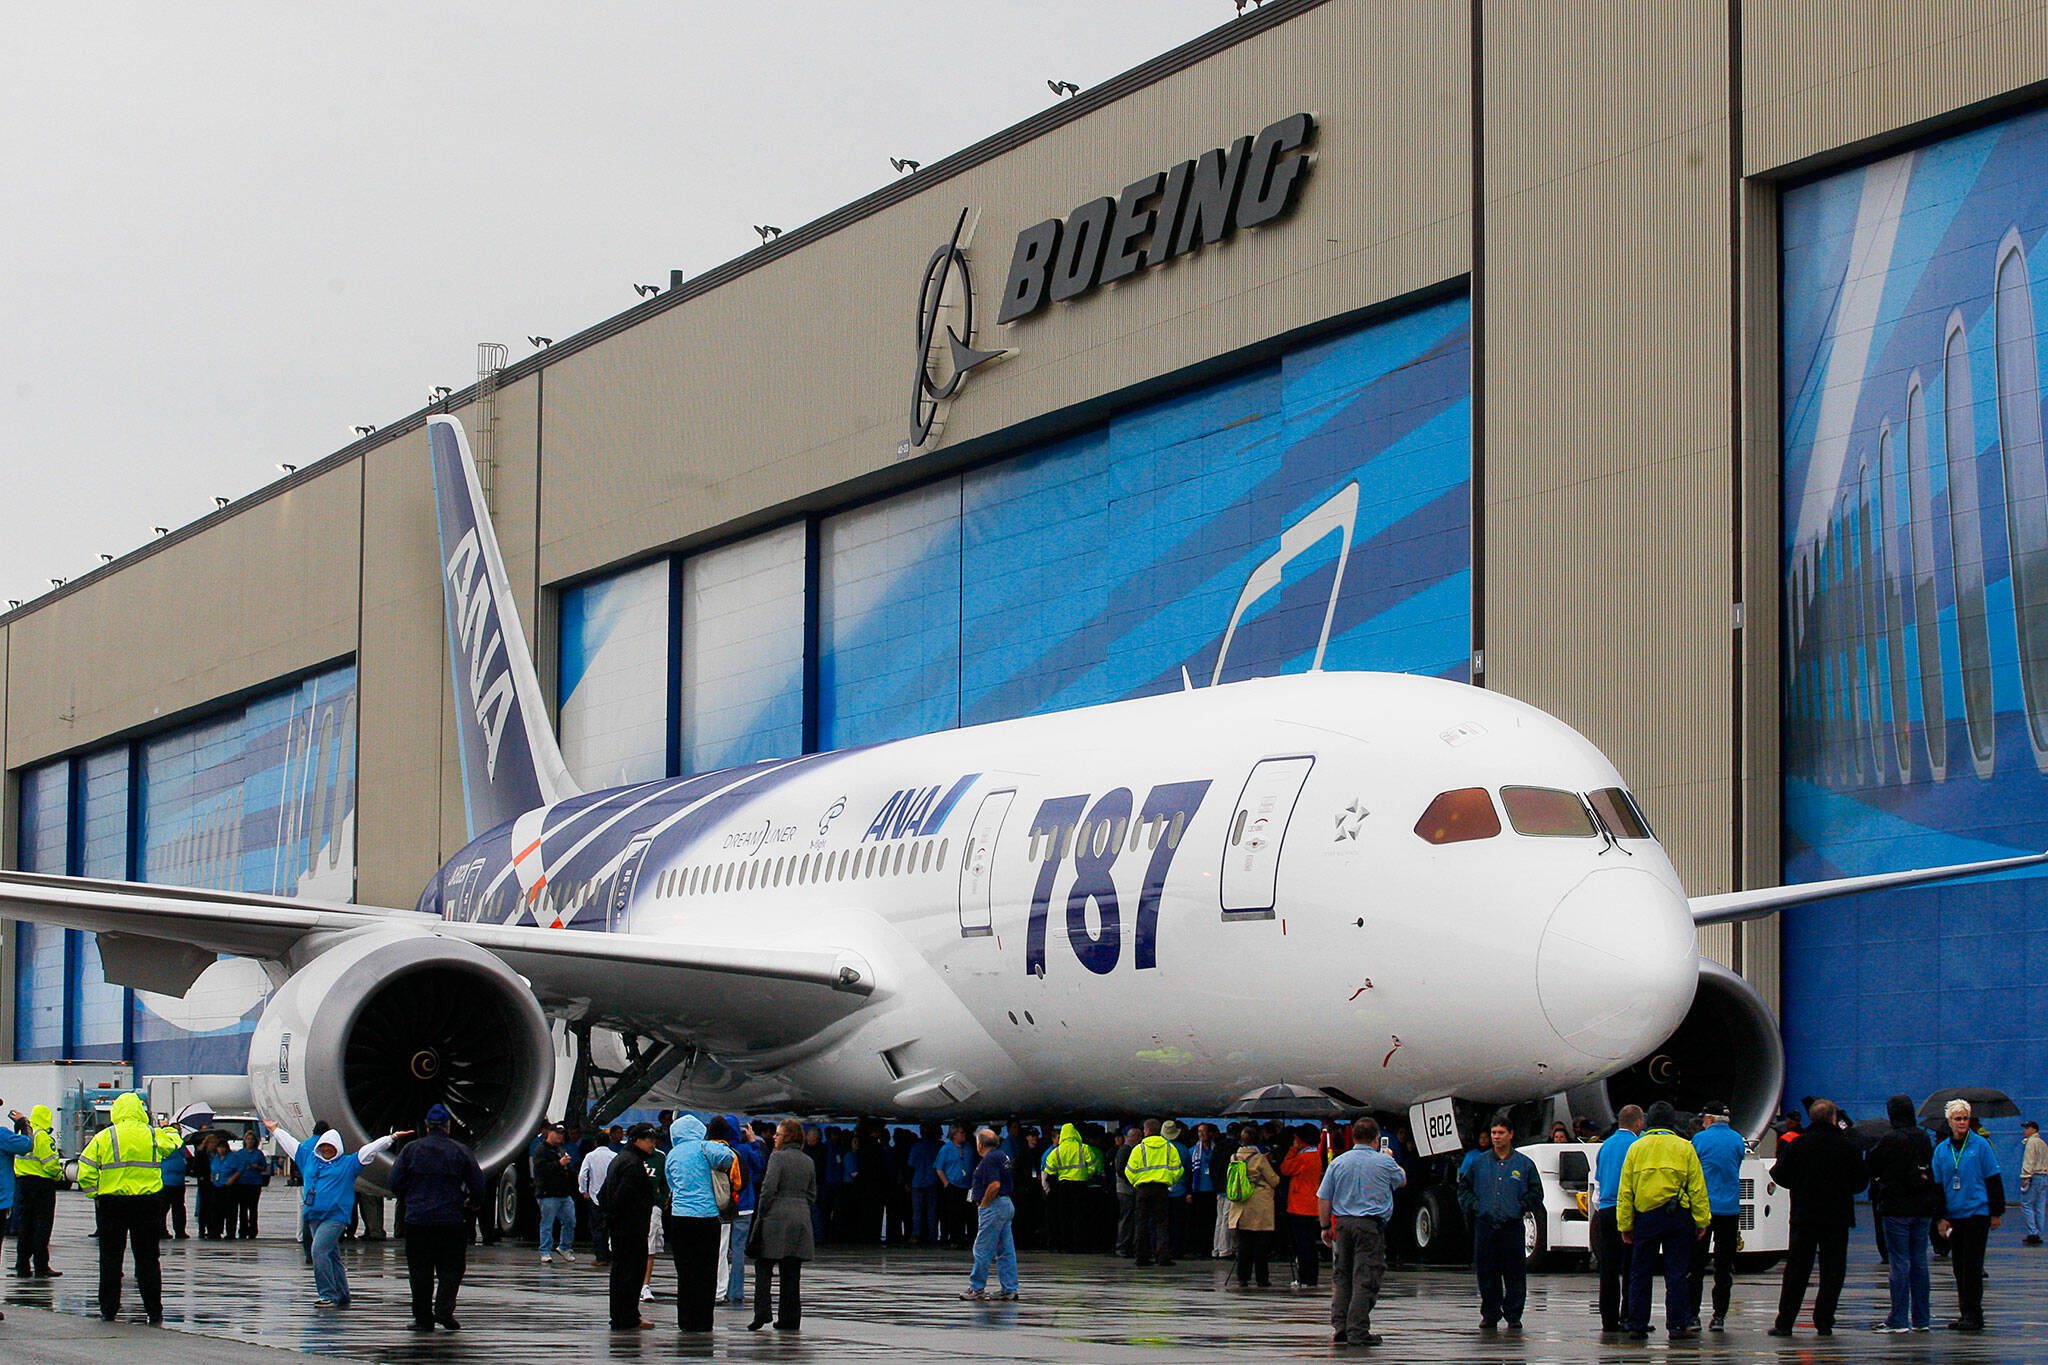 Hundreds of Boeing employees get ready to lead the second 787 for delivery to All Nippon Airways on Sept. 26, 2011. (Michael O’Leary / Herald file)